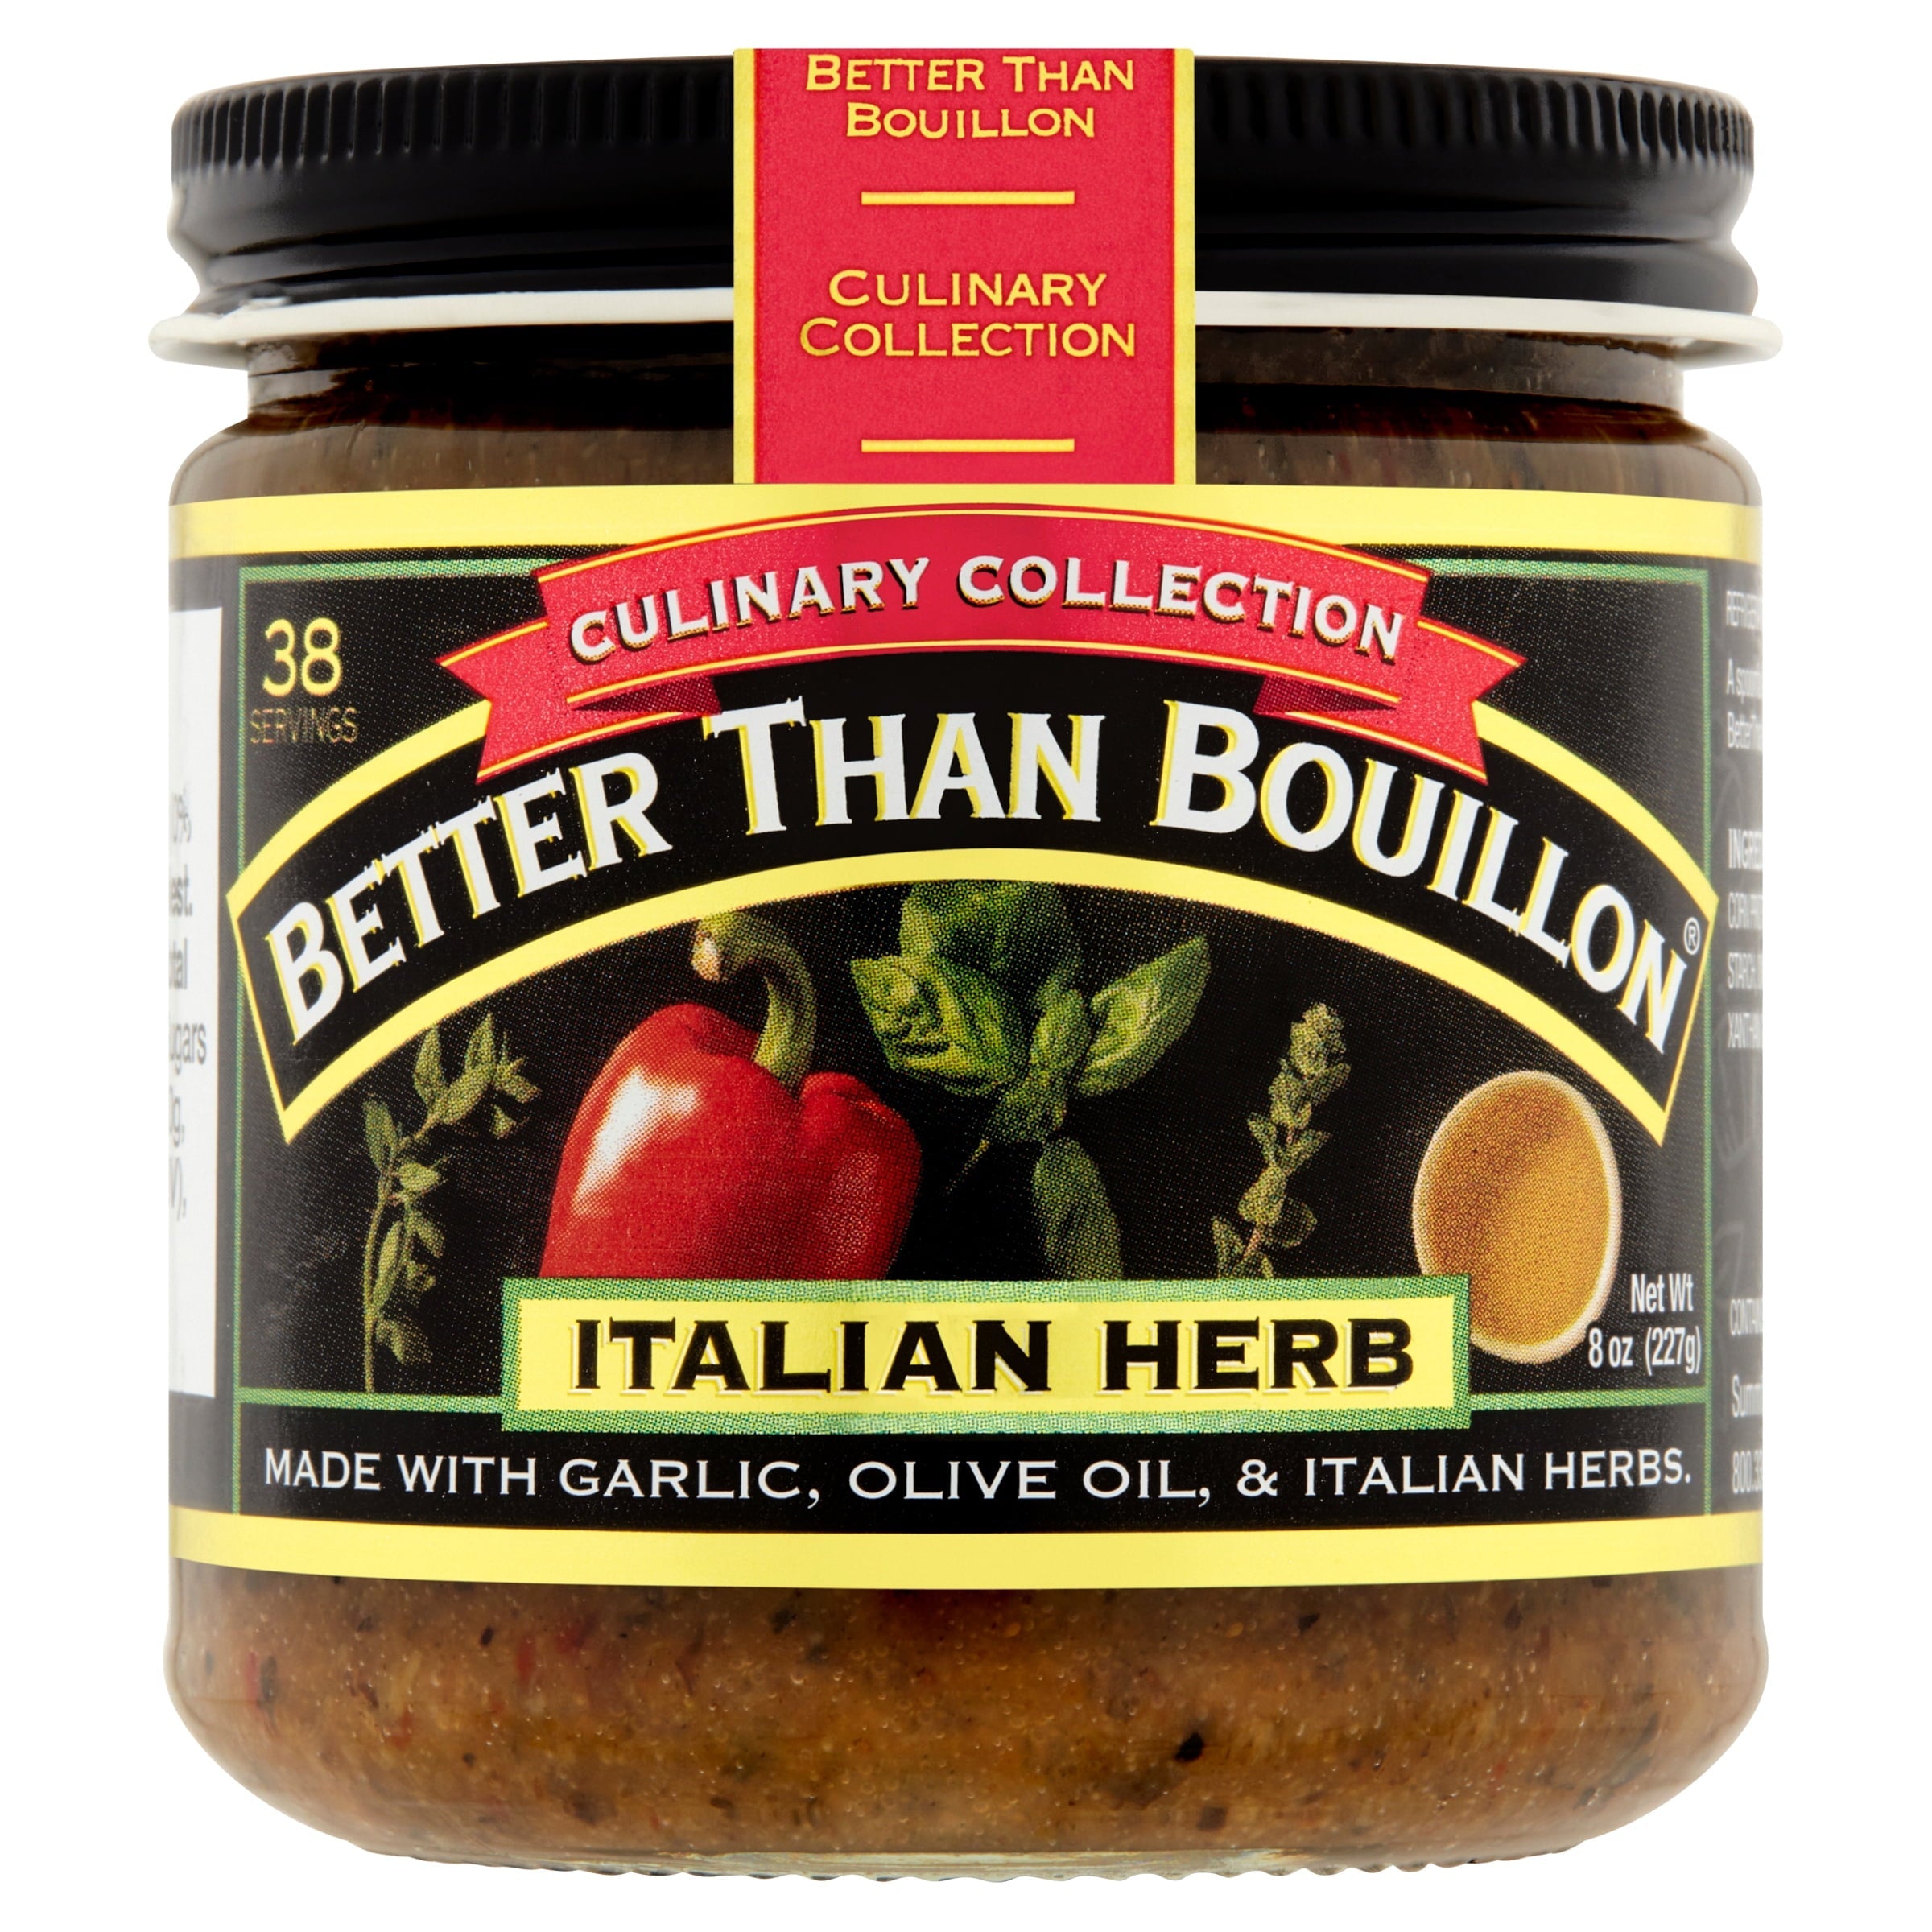 Better Than Bouillon Culinary Collection Italian Herb Base 8 oz Jar